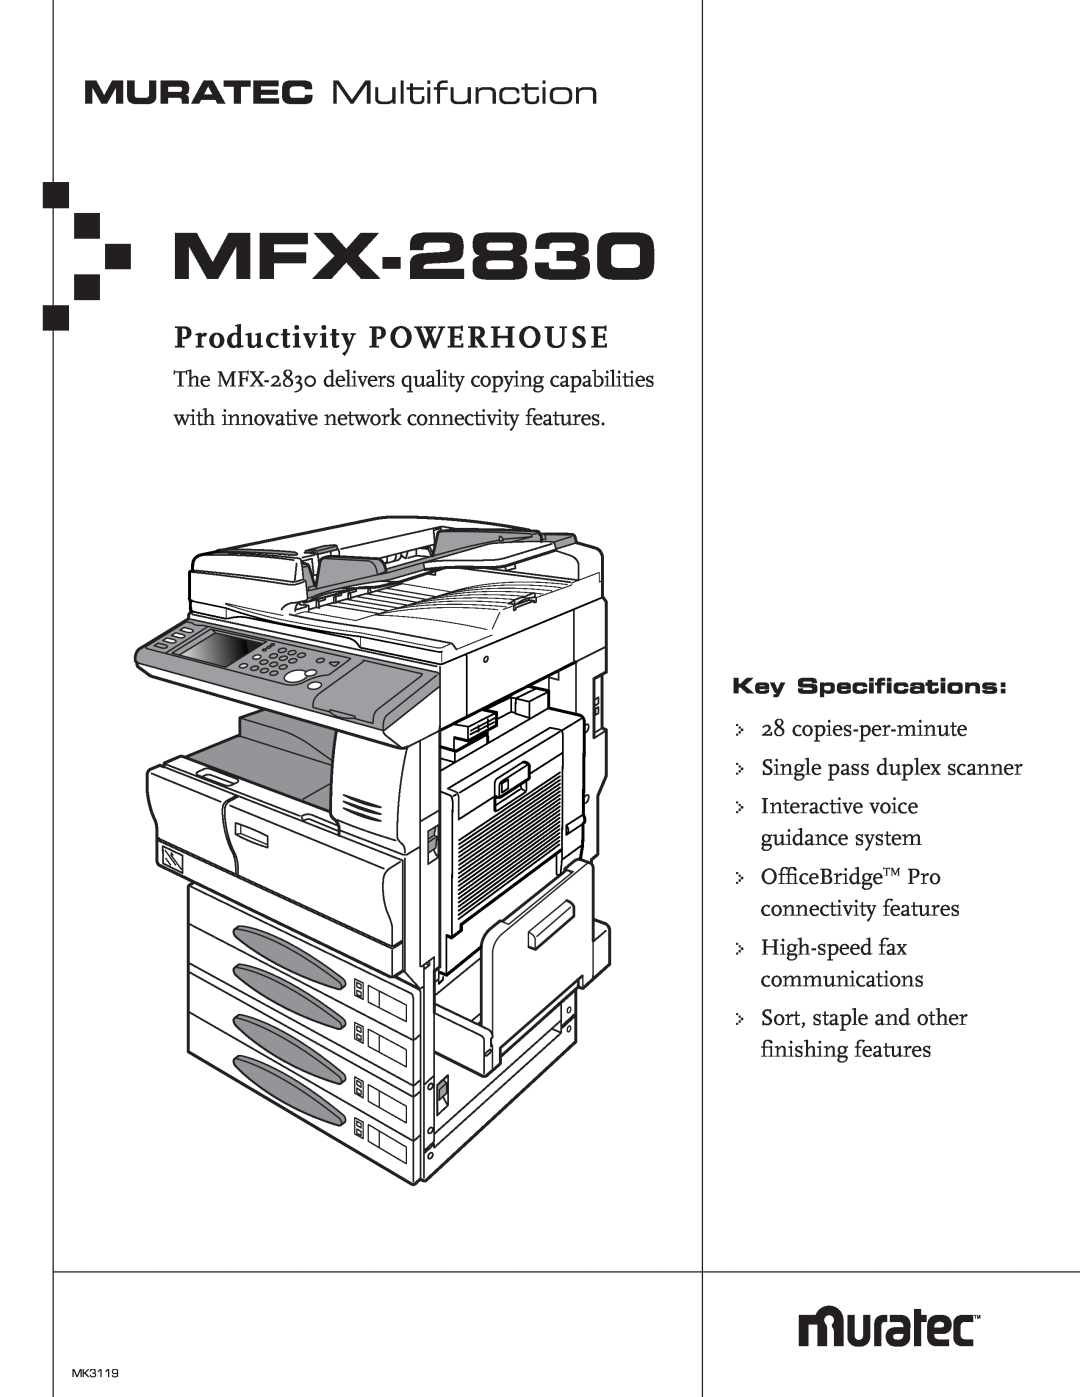 Muratec MFX-2830 specifications MURATEC Multifunction, MFXProductivity POWERHOUSE-2830, High-speed fax communications 